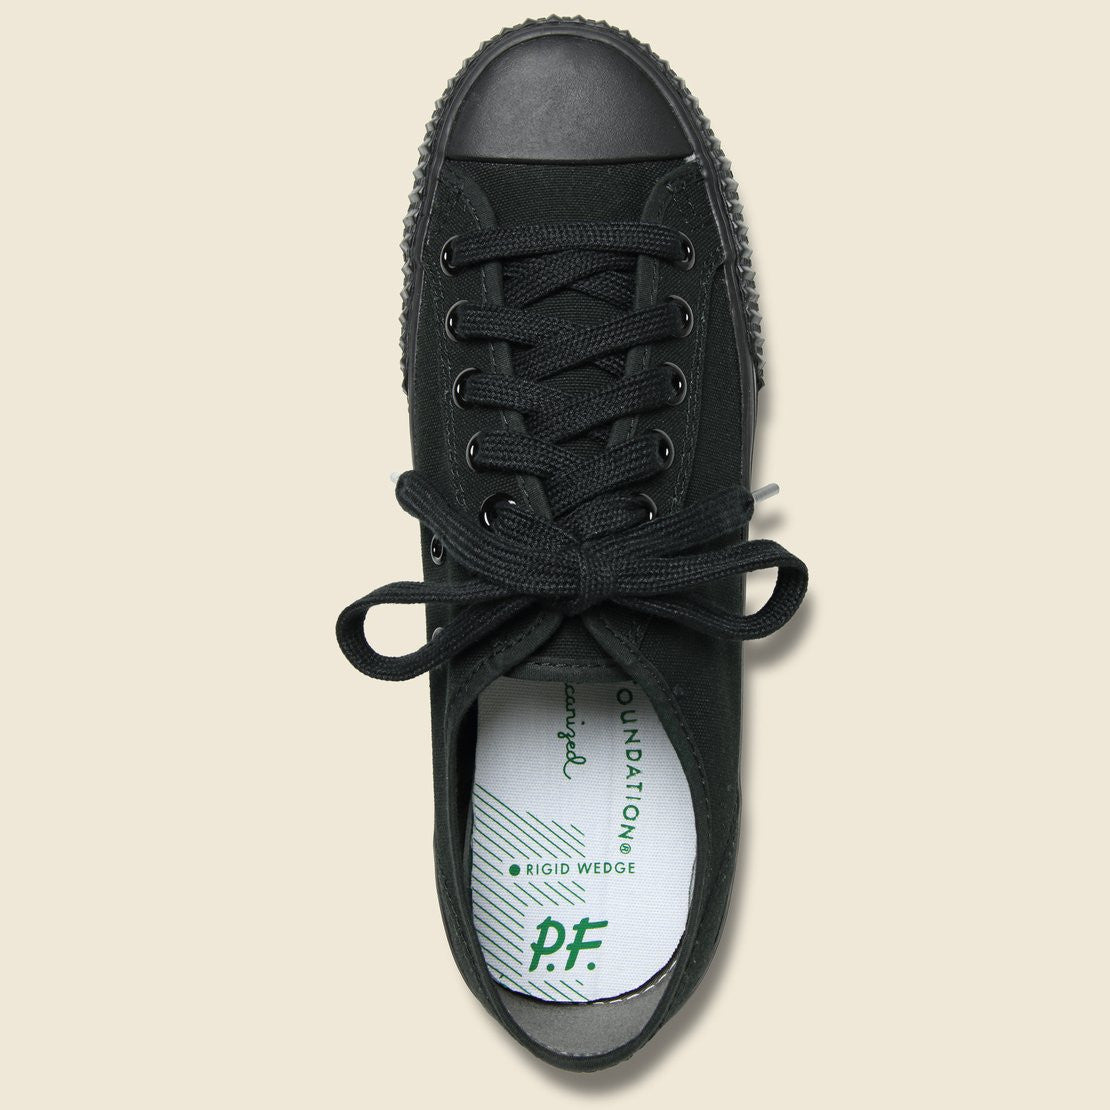 Sandlot Center Lo Top - Black - PF Flyers - STAG Provisions - Shoes - Athletic